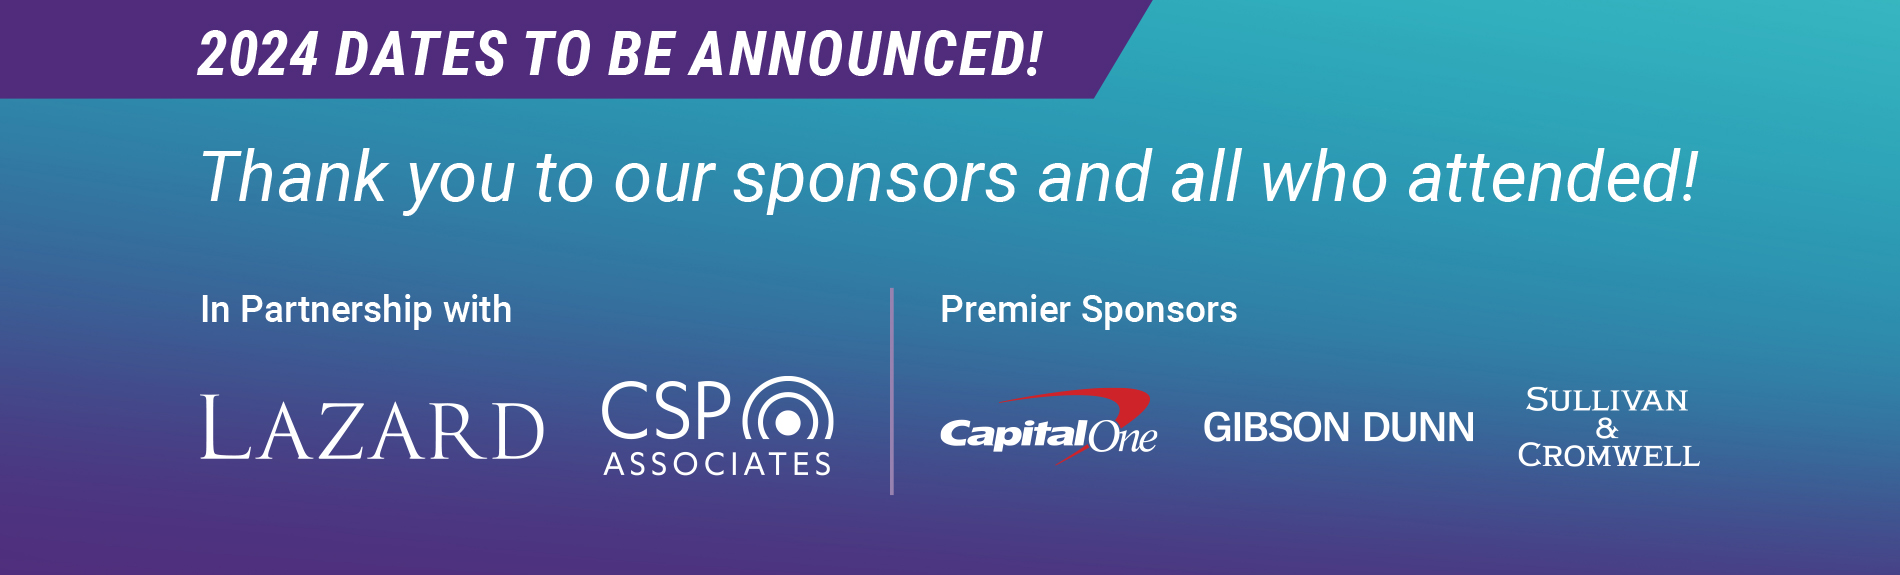 Thank you to our 2023 sponsors